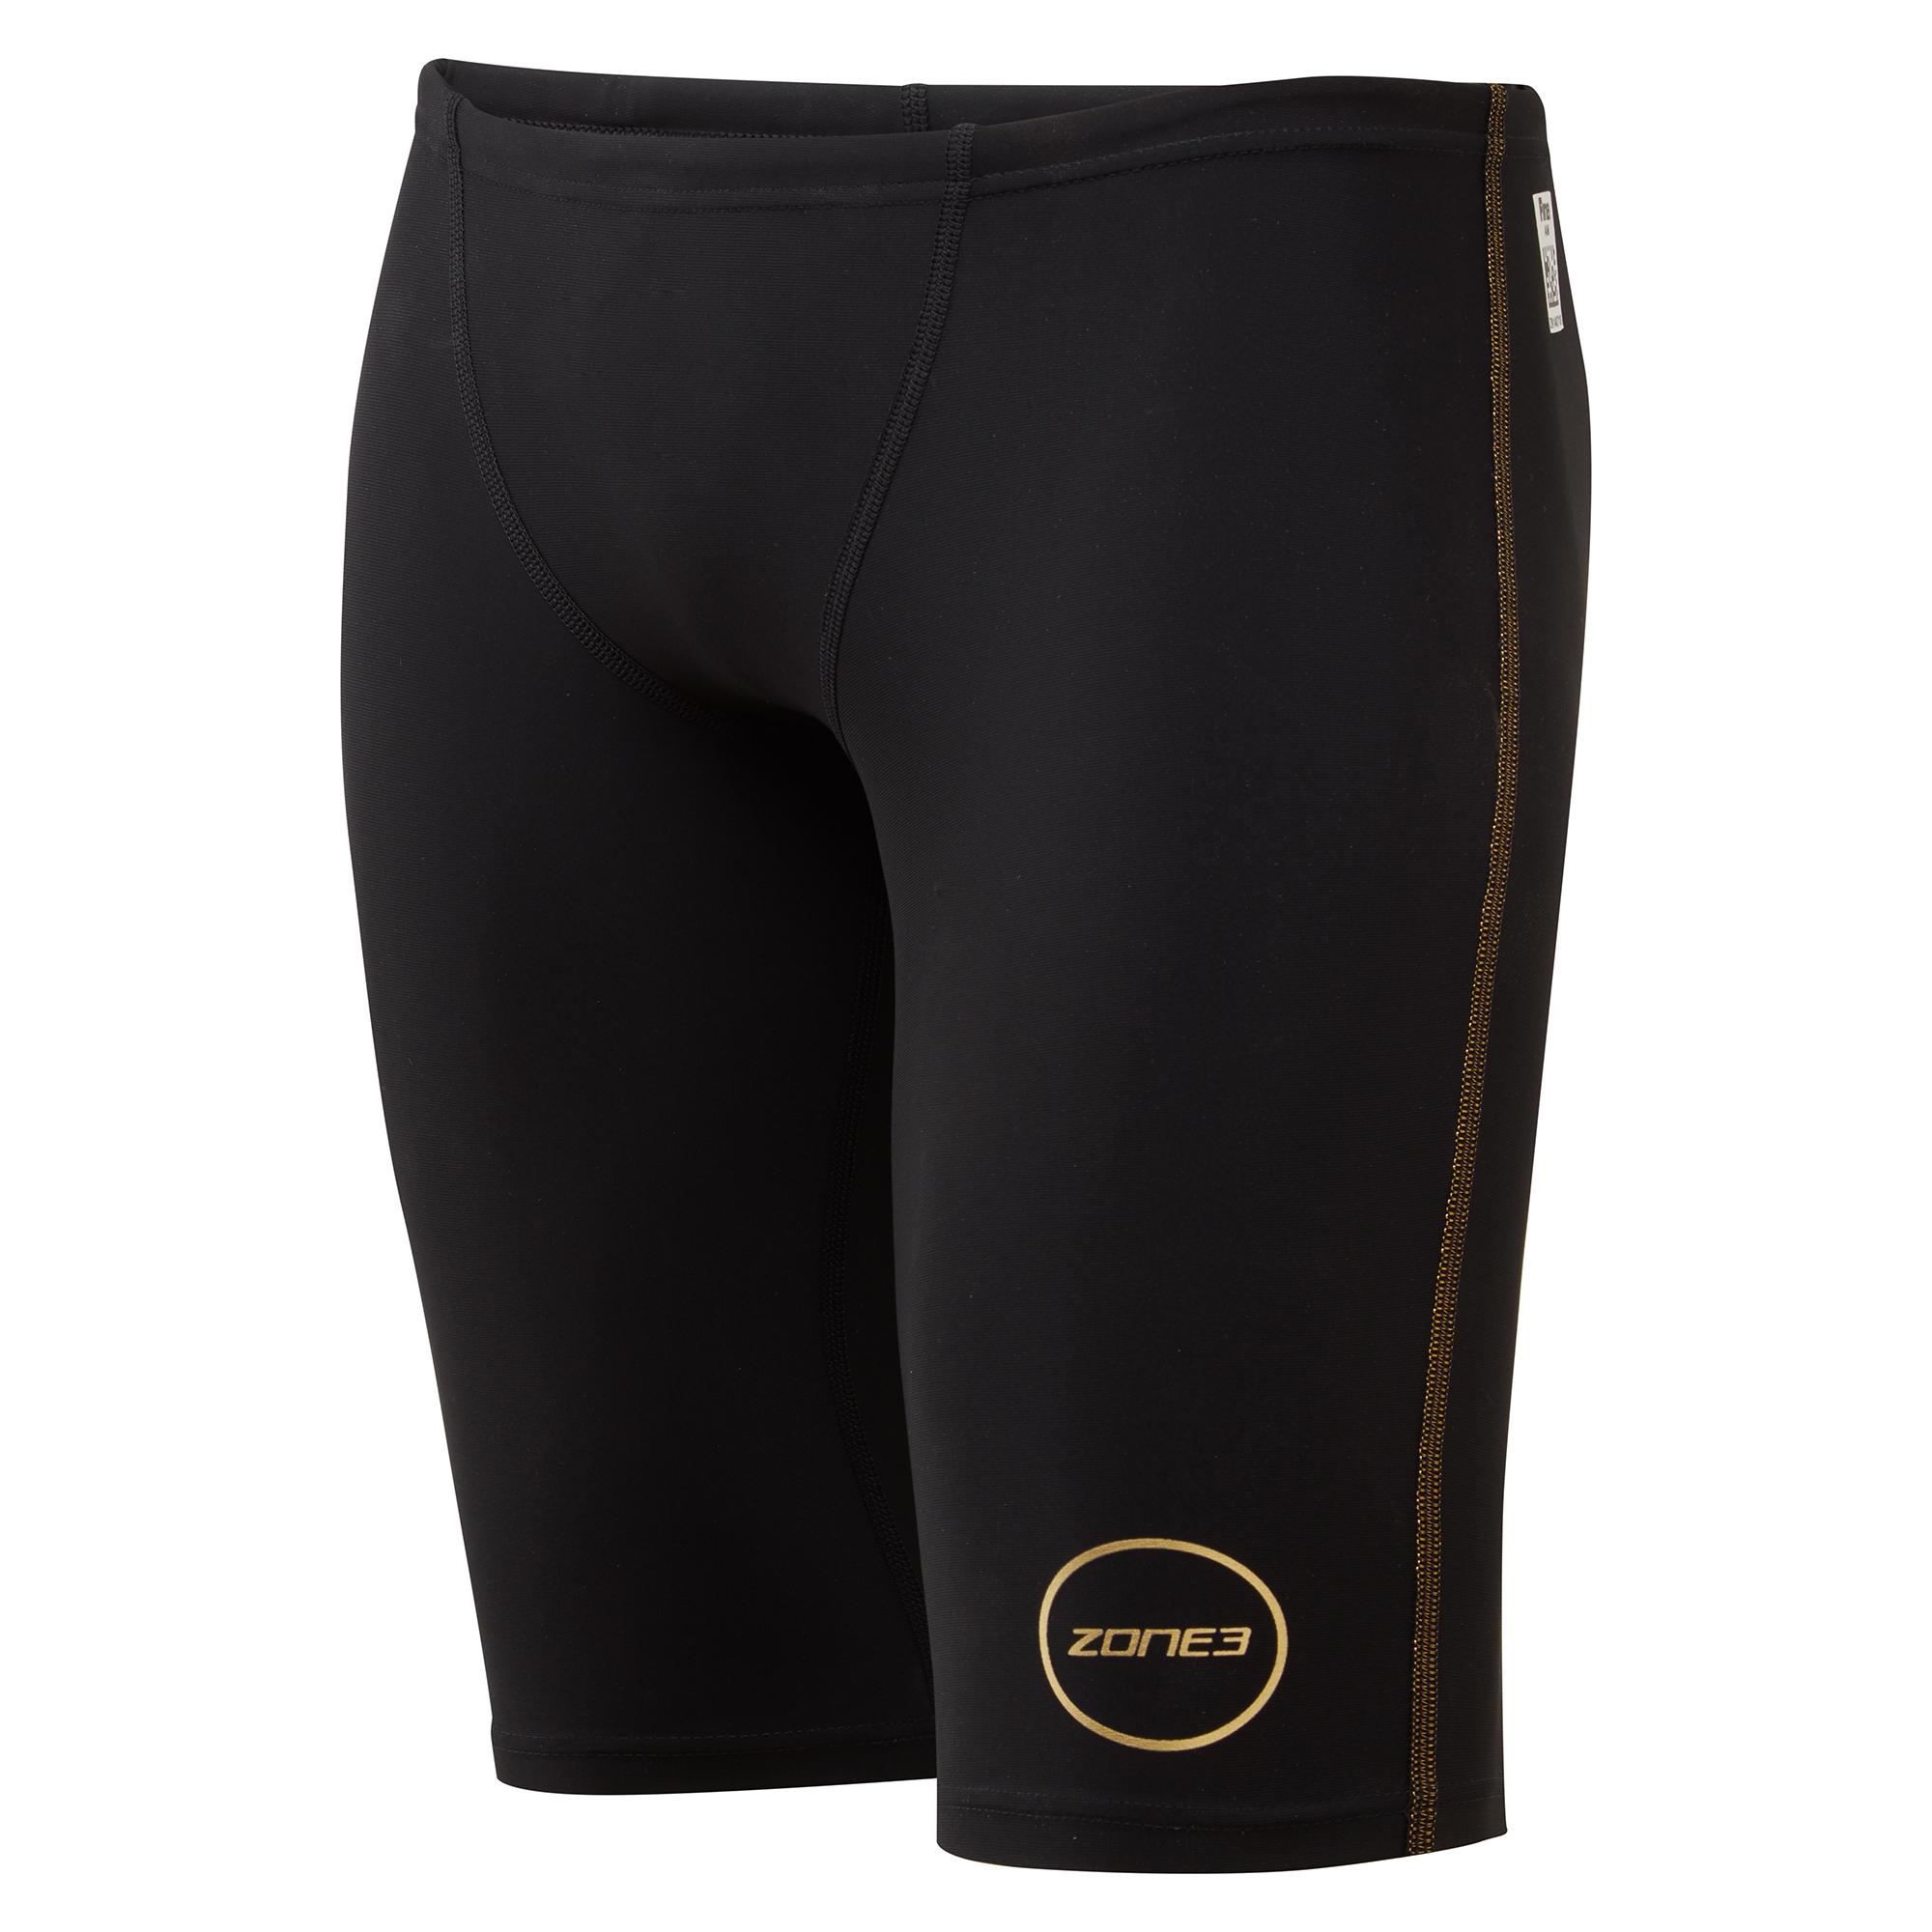 Zone3 Fina Approved Mf-x Performance Gold Jammers - Black/gold